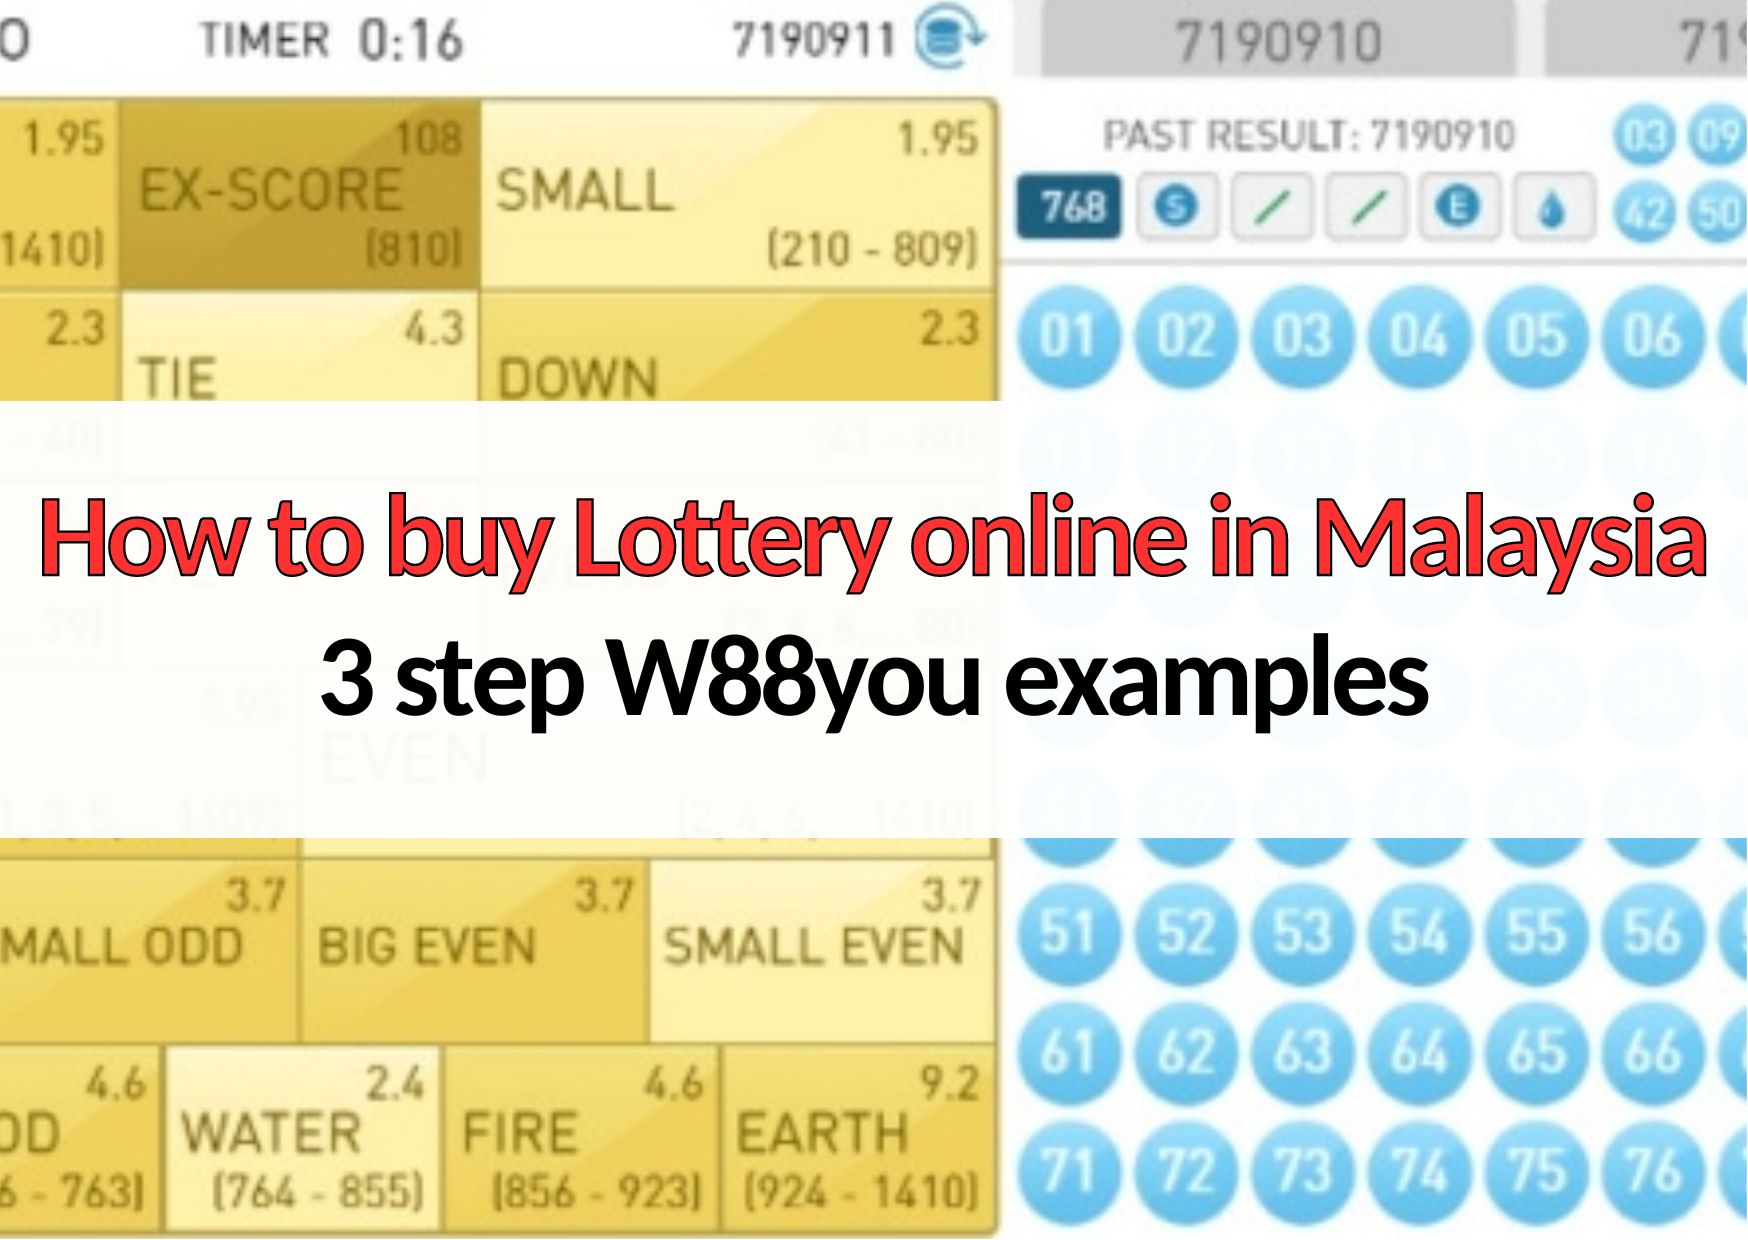 How to buy Lottery online in Malaysia